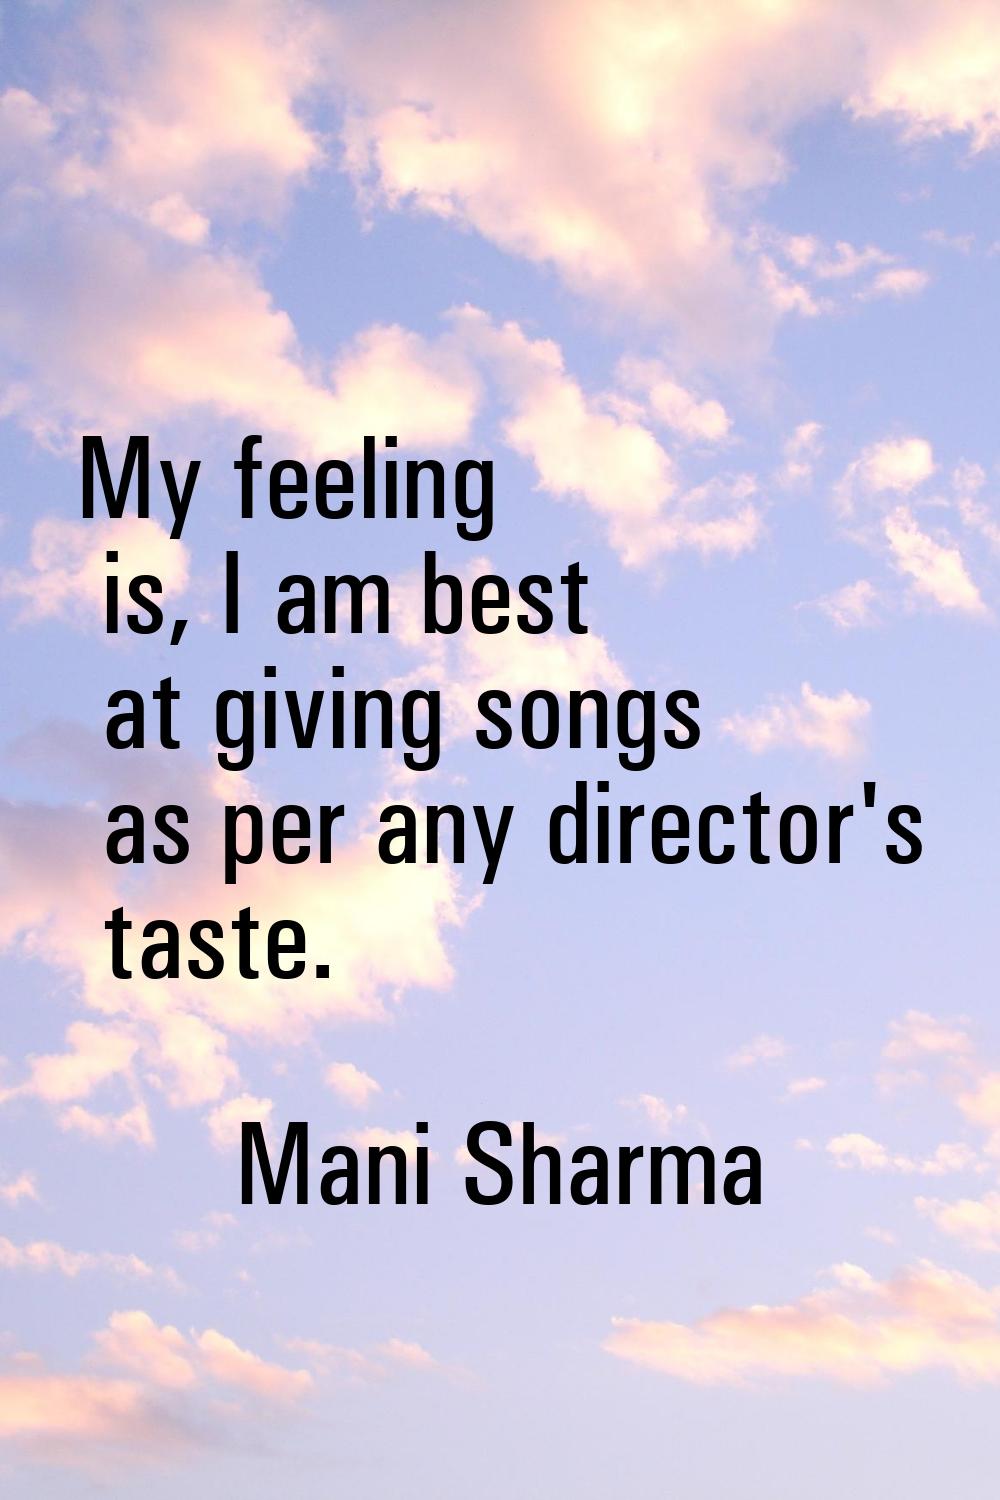 My feeling is, I am best at giving songs as per any director's taste.